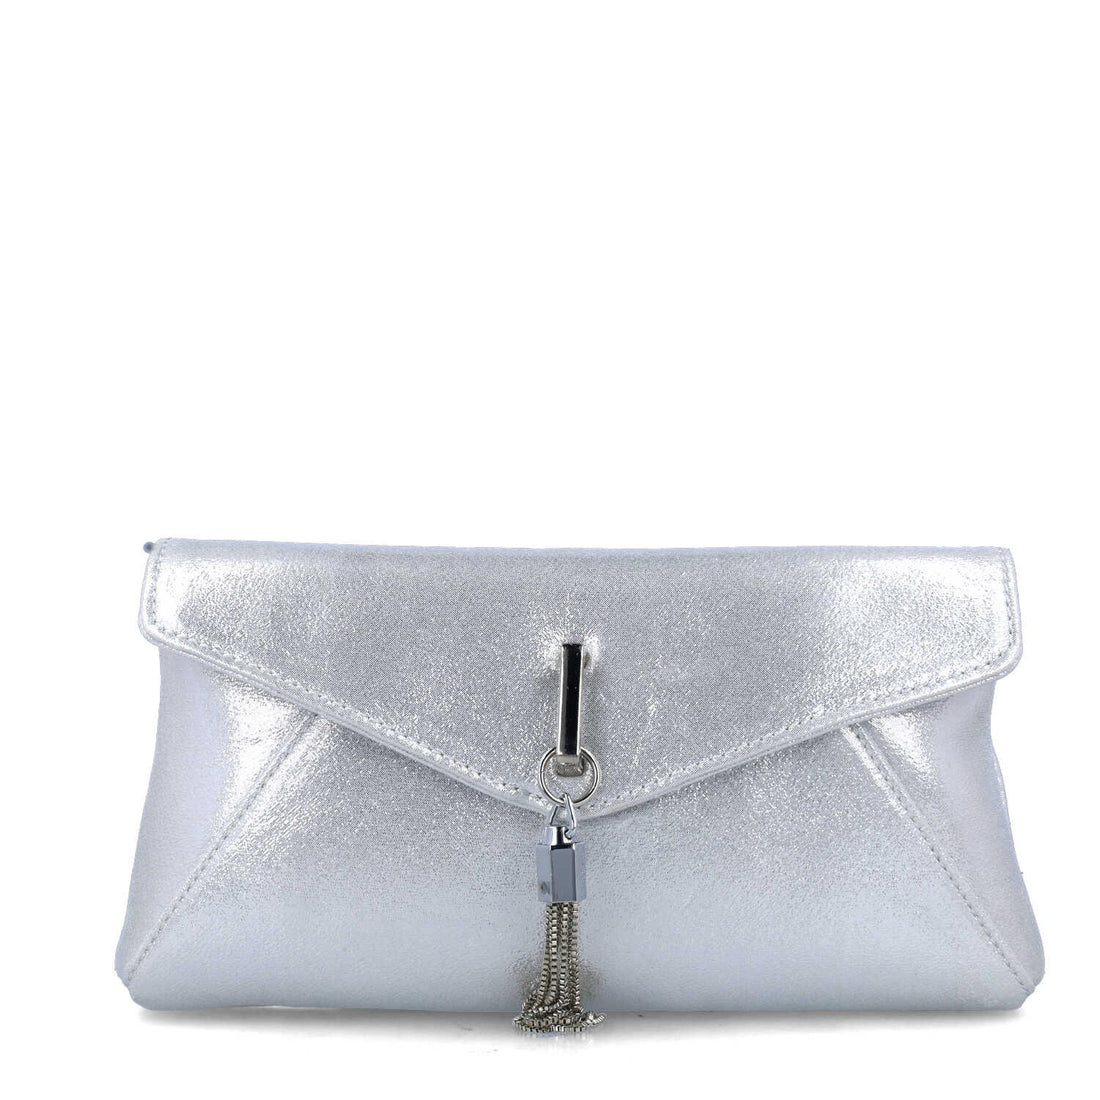 Silver Embellished Clutch With Shimmer_85698_09_01